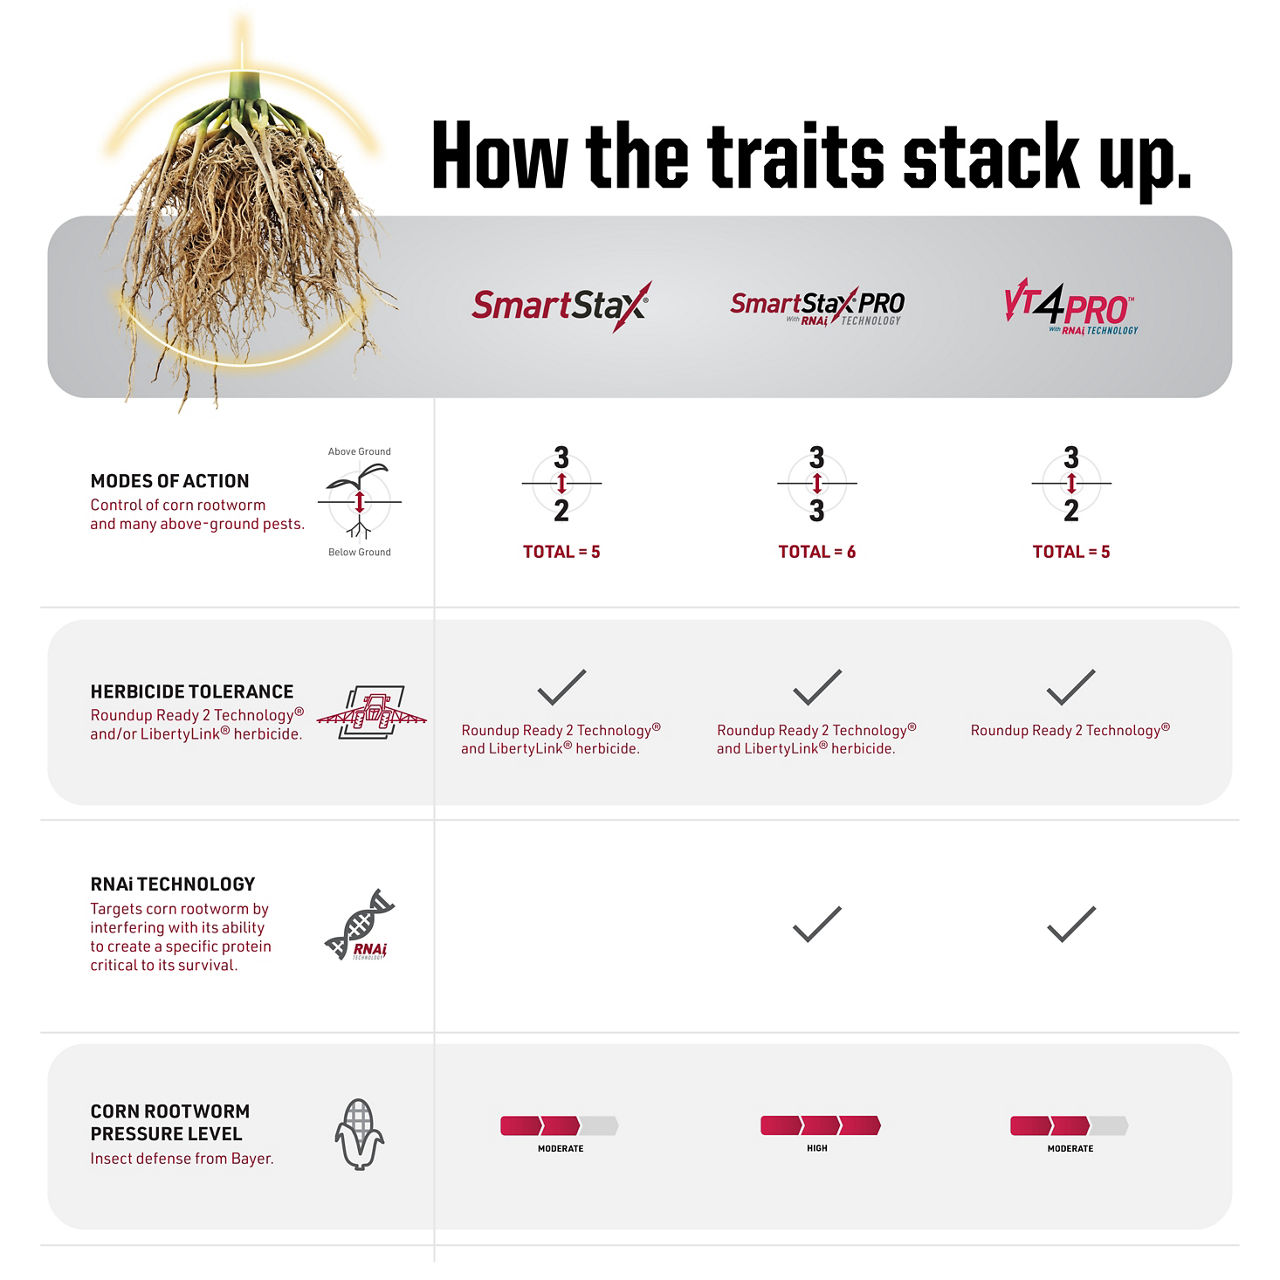 Bayer traits chart showing how SmartStax, SmartStax Pro and VT4 Pro stack up